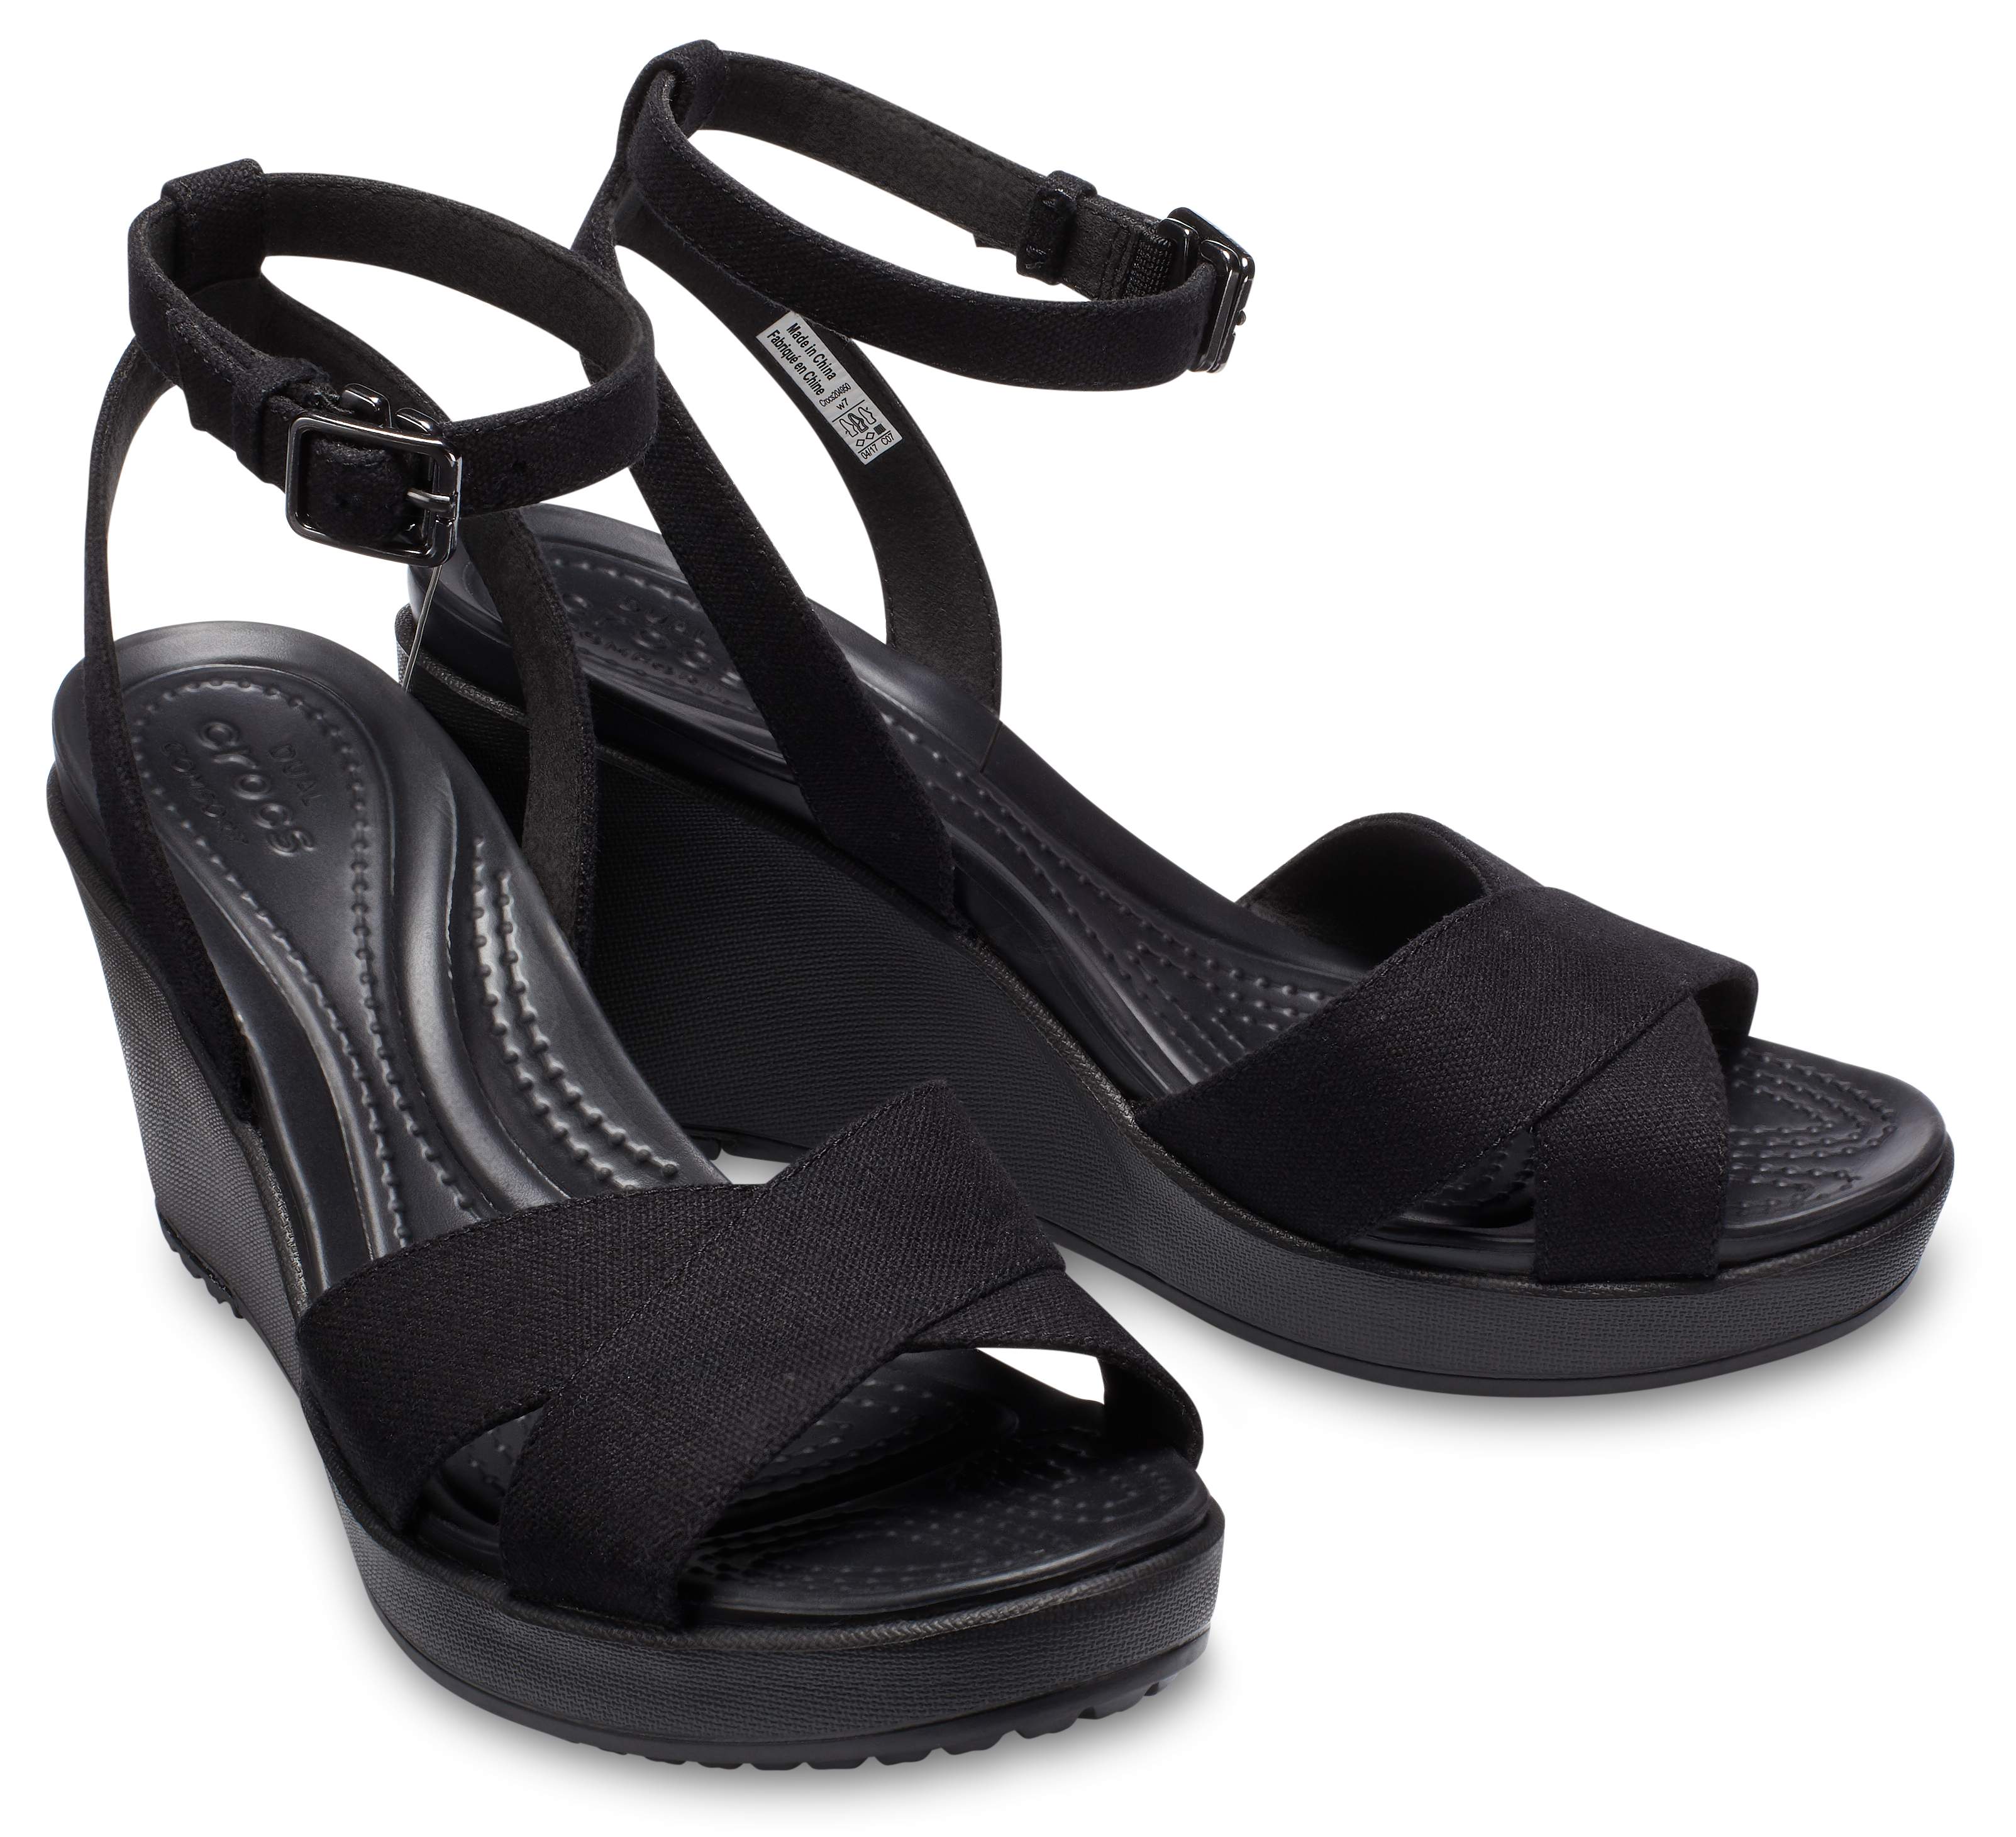 crocs leigh ankle strap wedge